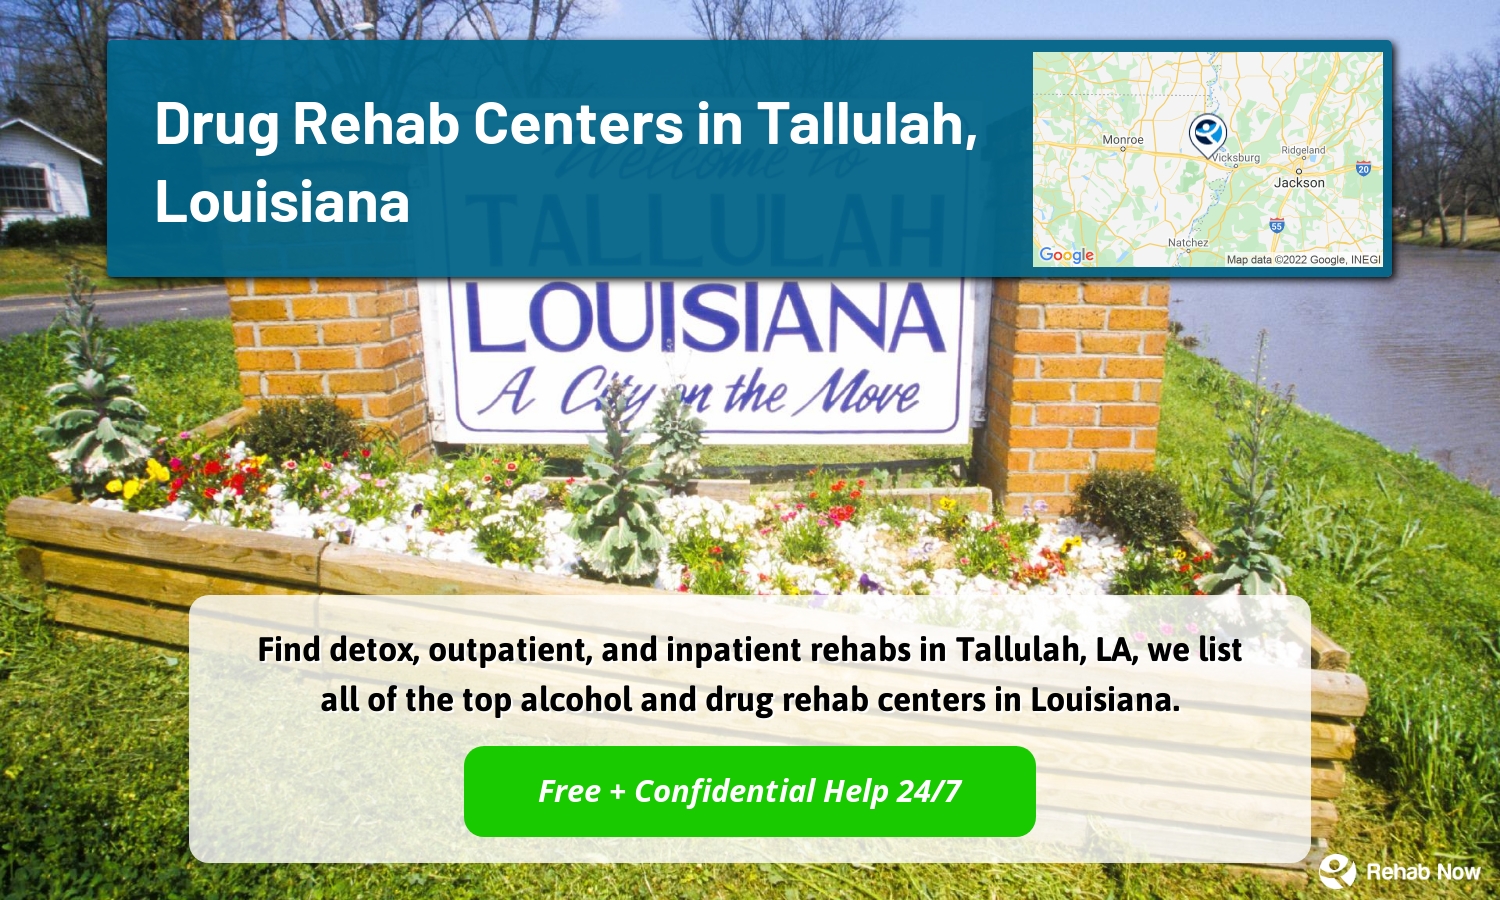 Find detox, outpatient, and inpatient rehabs in Tallulah, LA, we list all of the top alcohol and drug rehab centers in Louisiana.